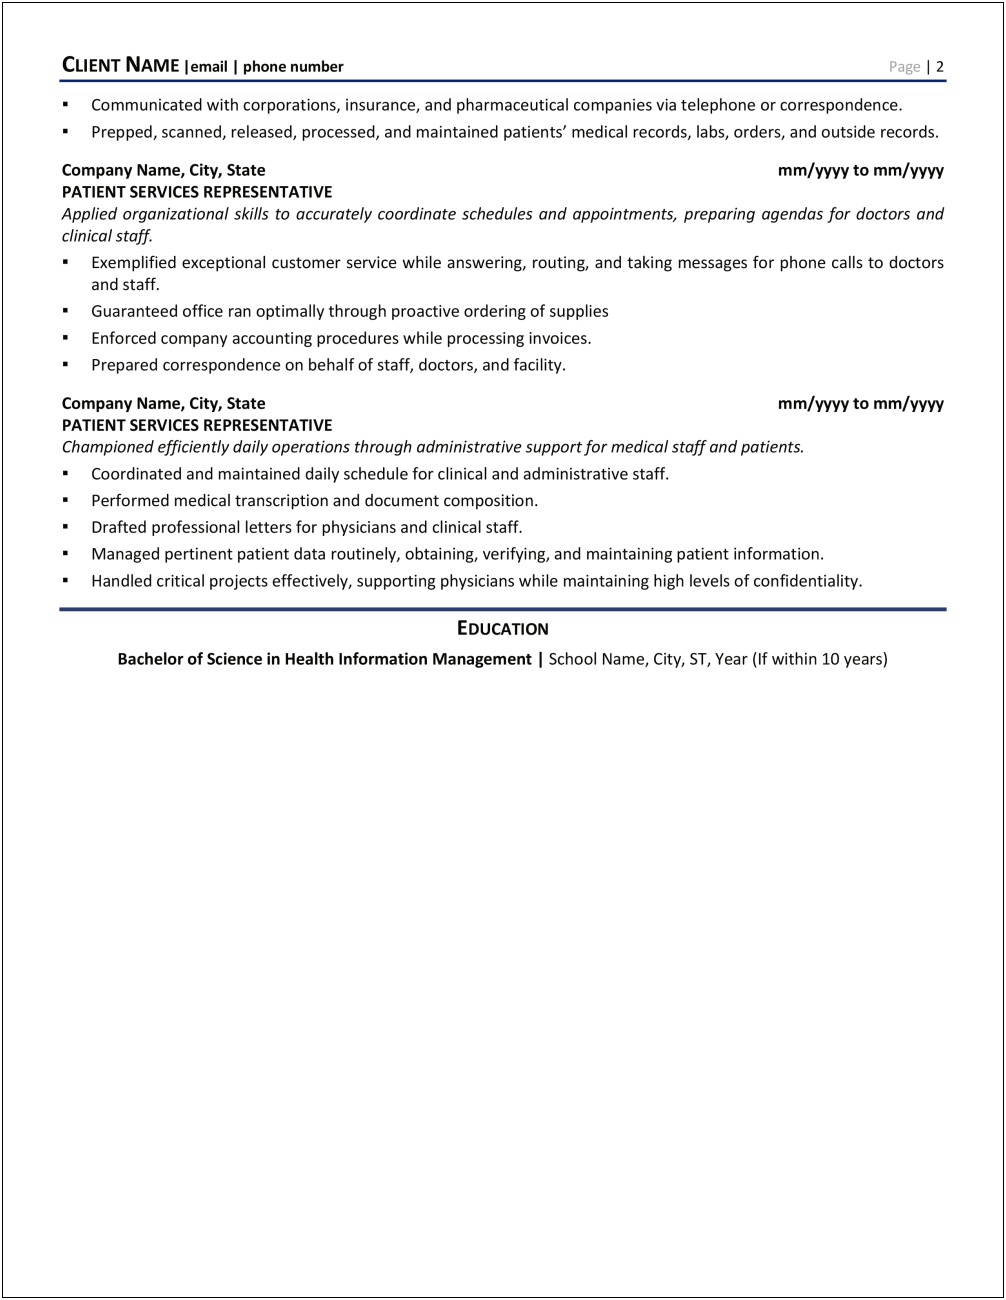 Customer Service Health Care Resume Examples